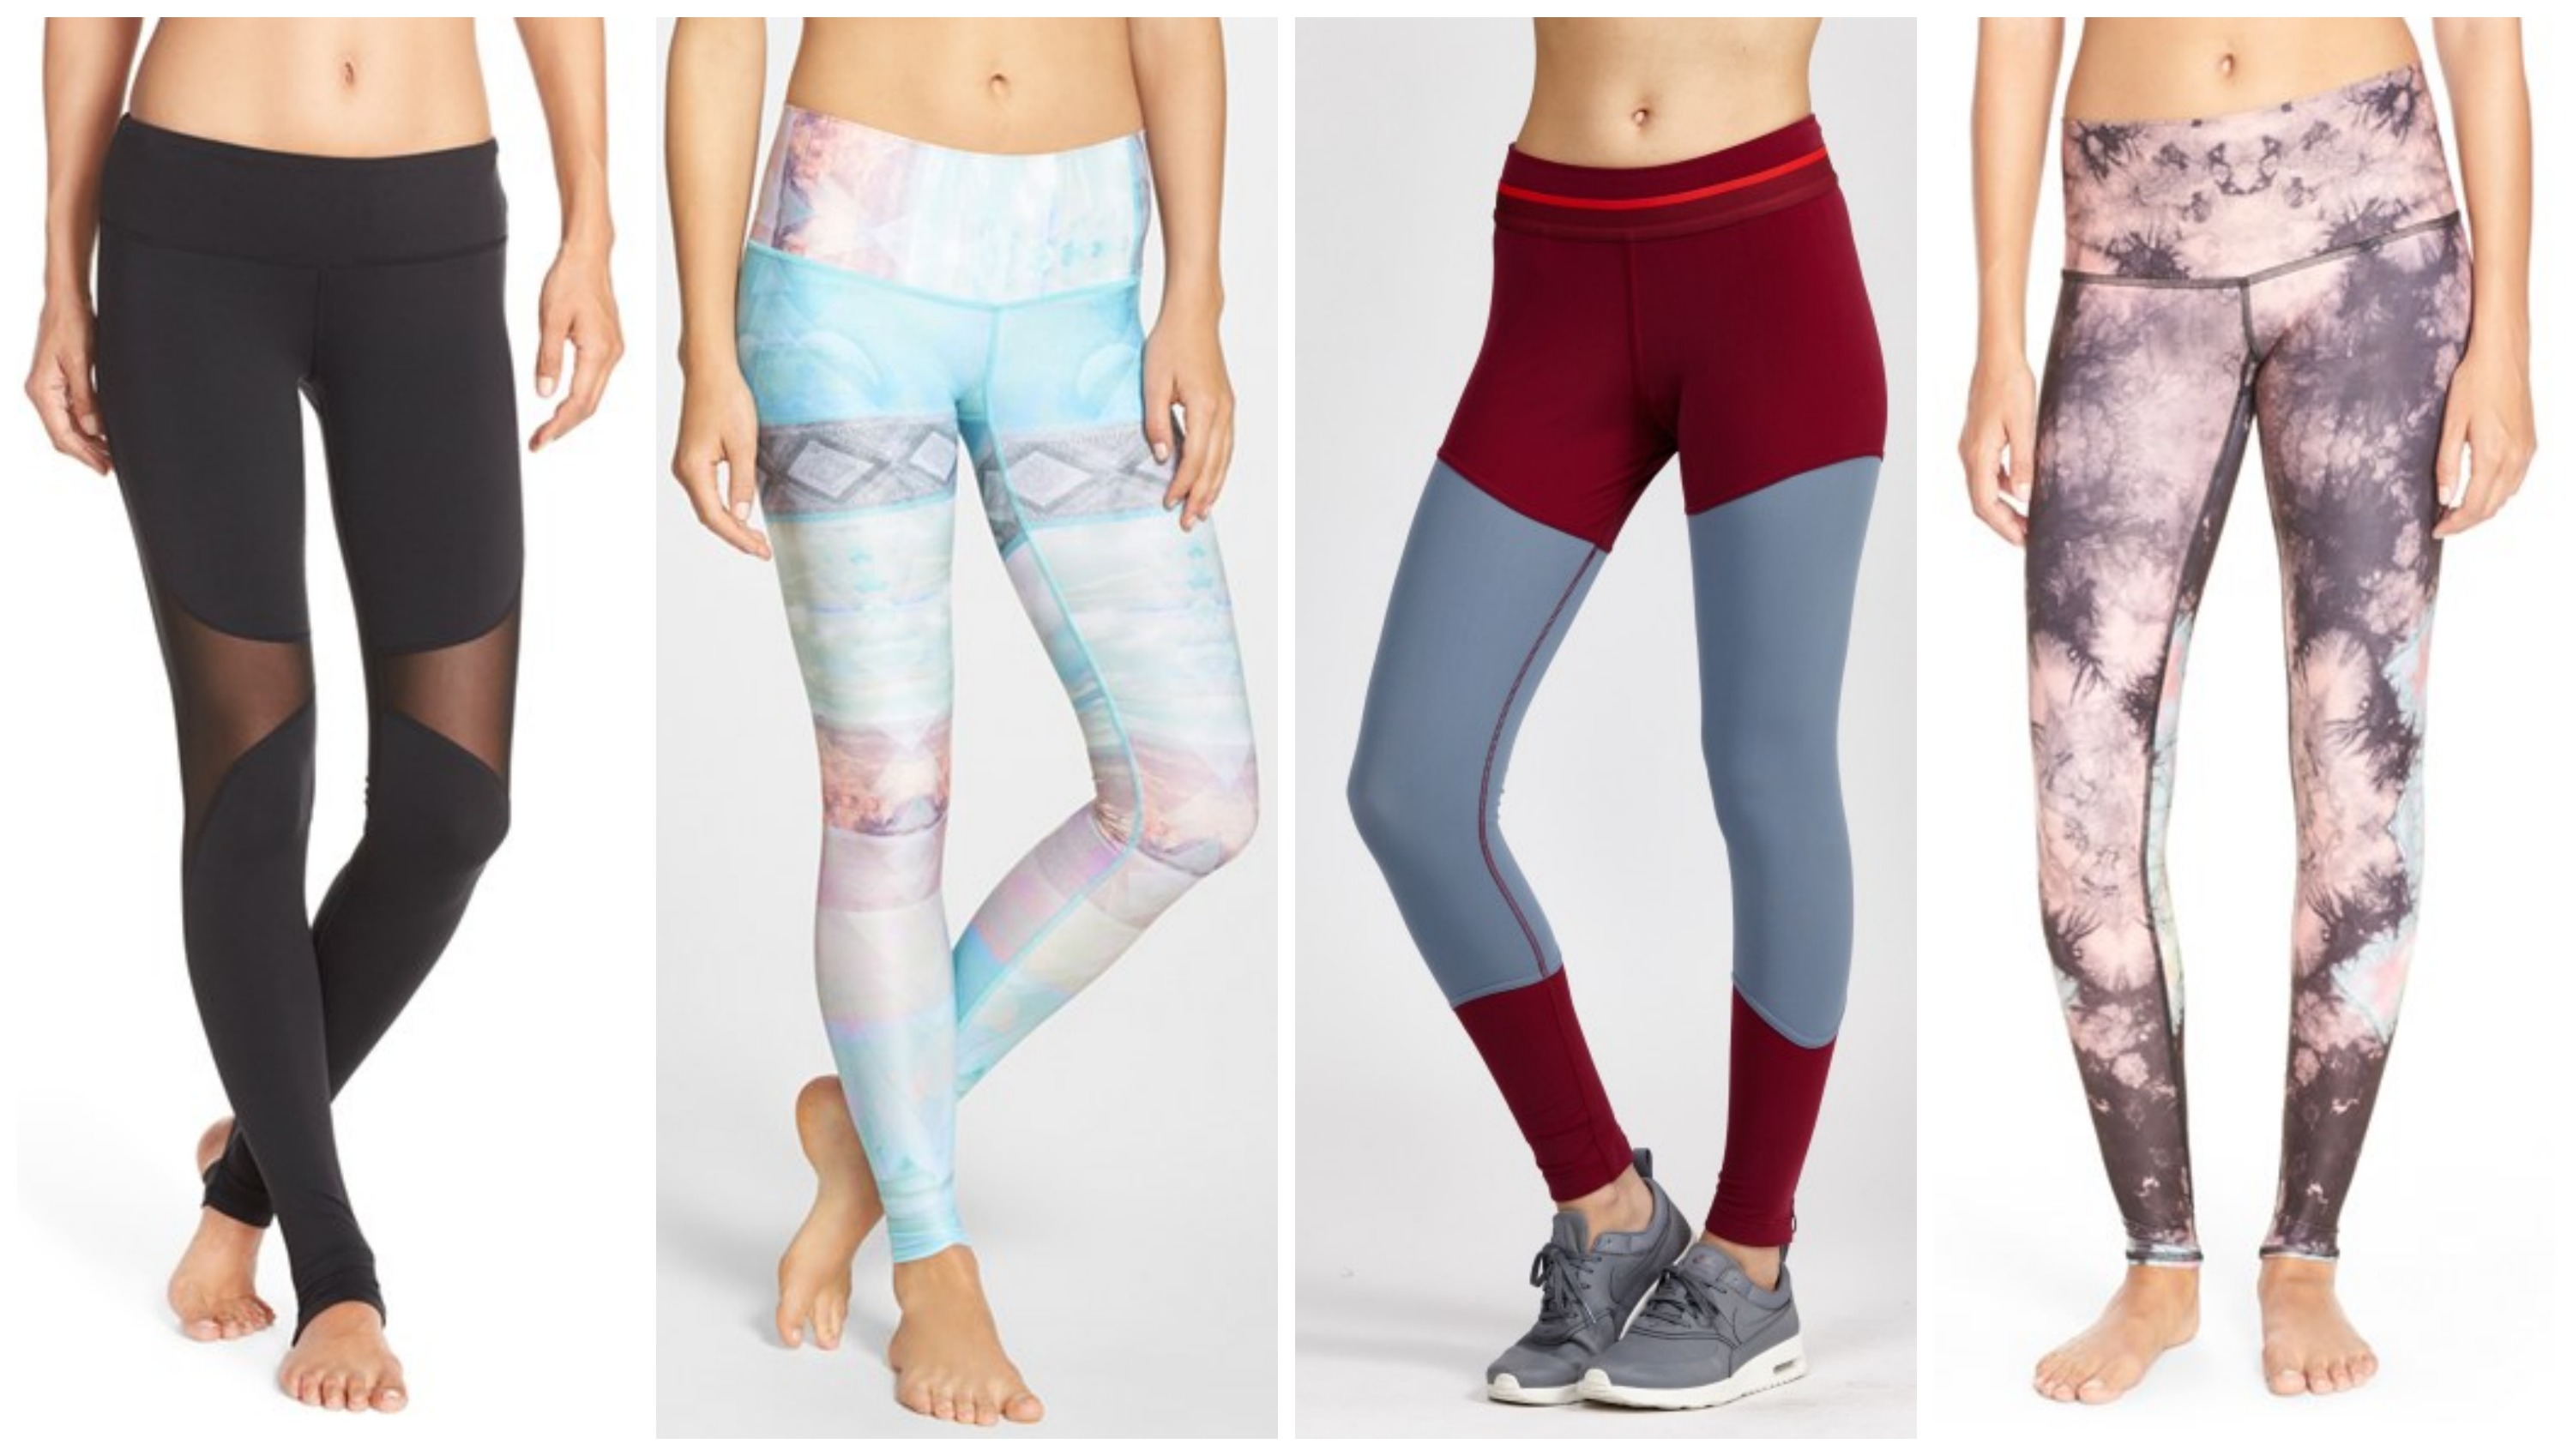 Wellness Wednesday: The actual best yoga pants for every occasion ...